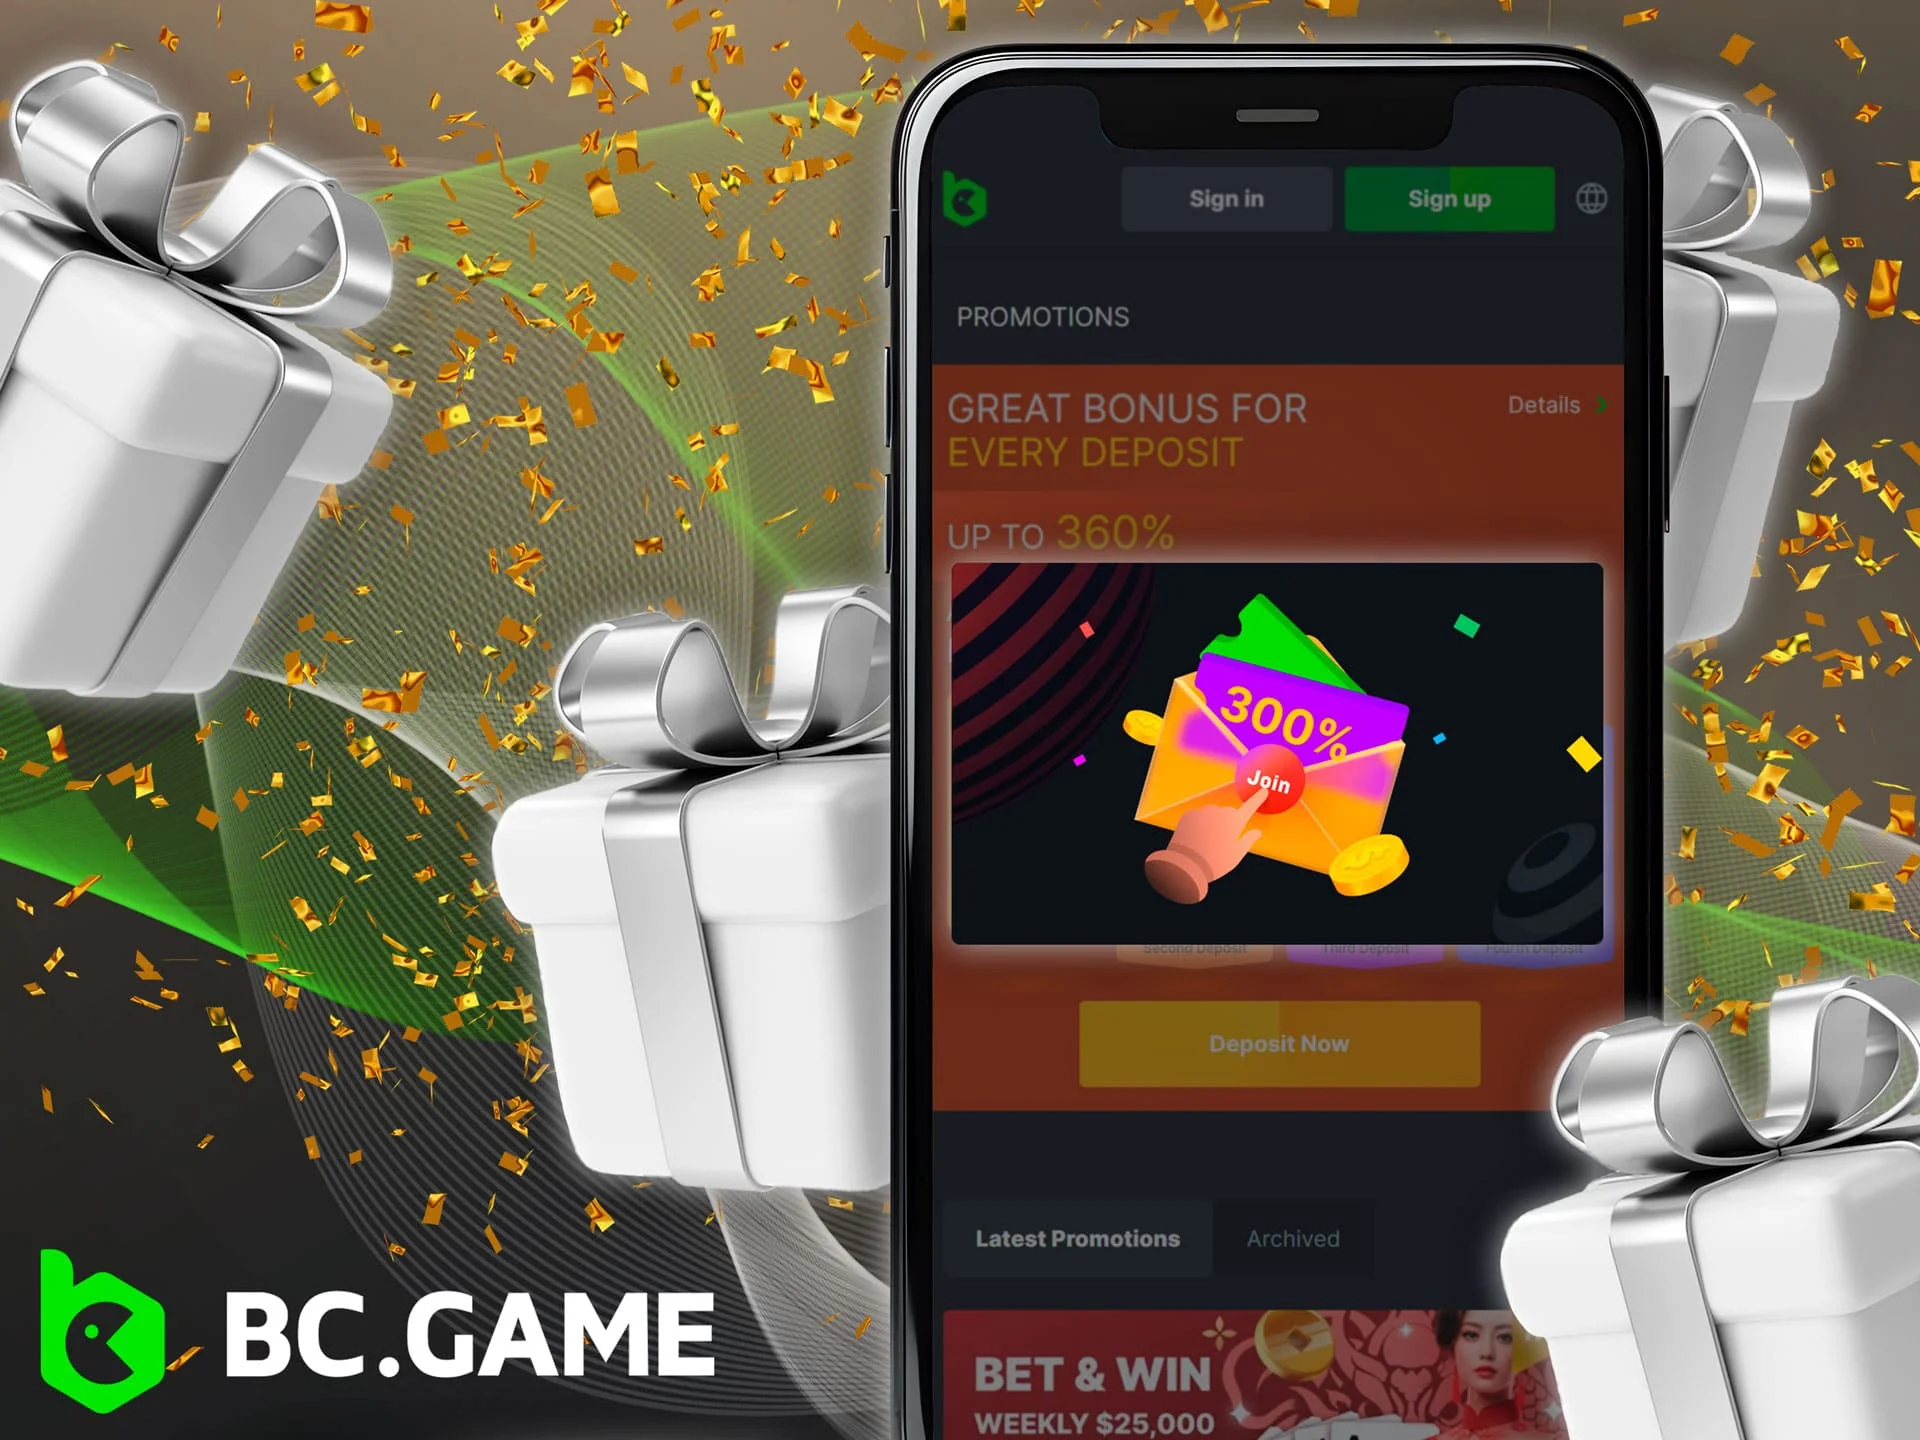 Sign up and start playing BC Game with a 360% welcome deposit bonus.